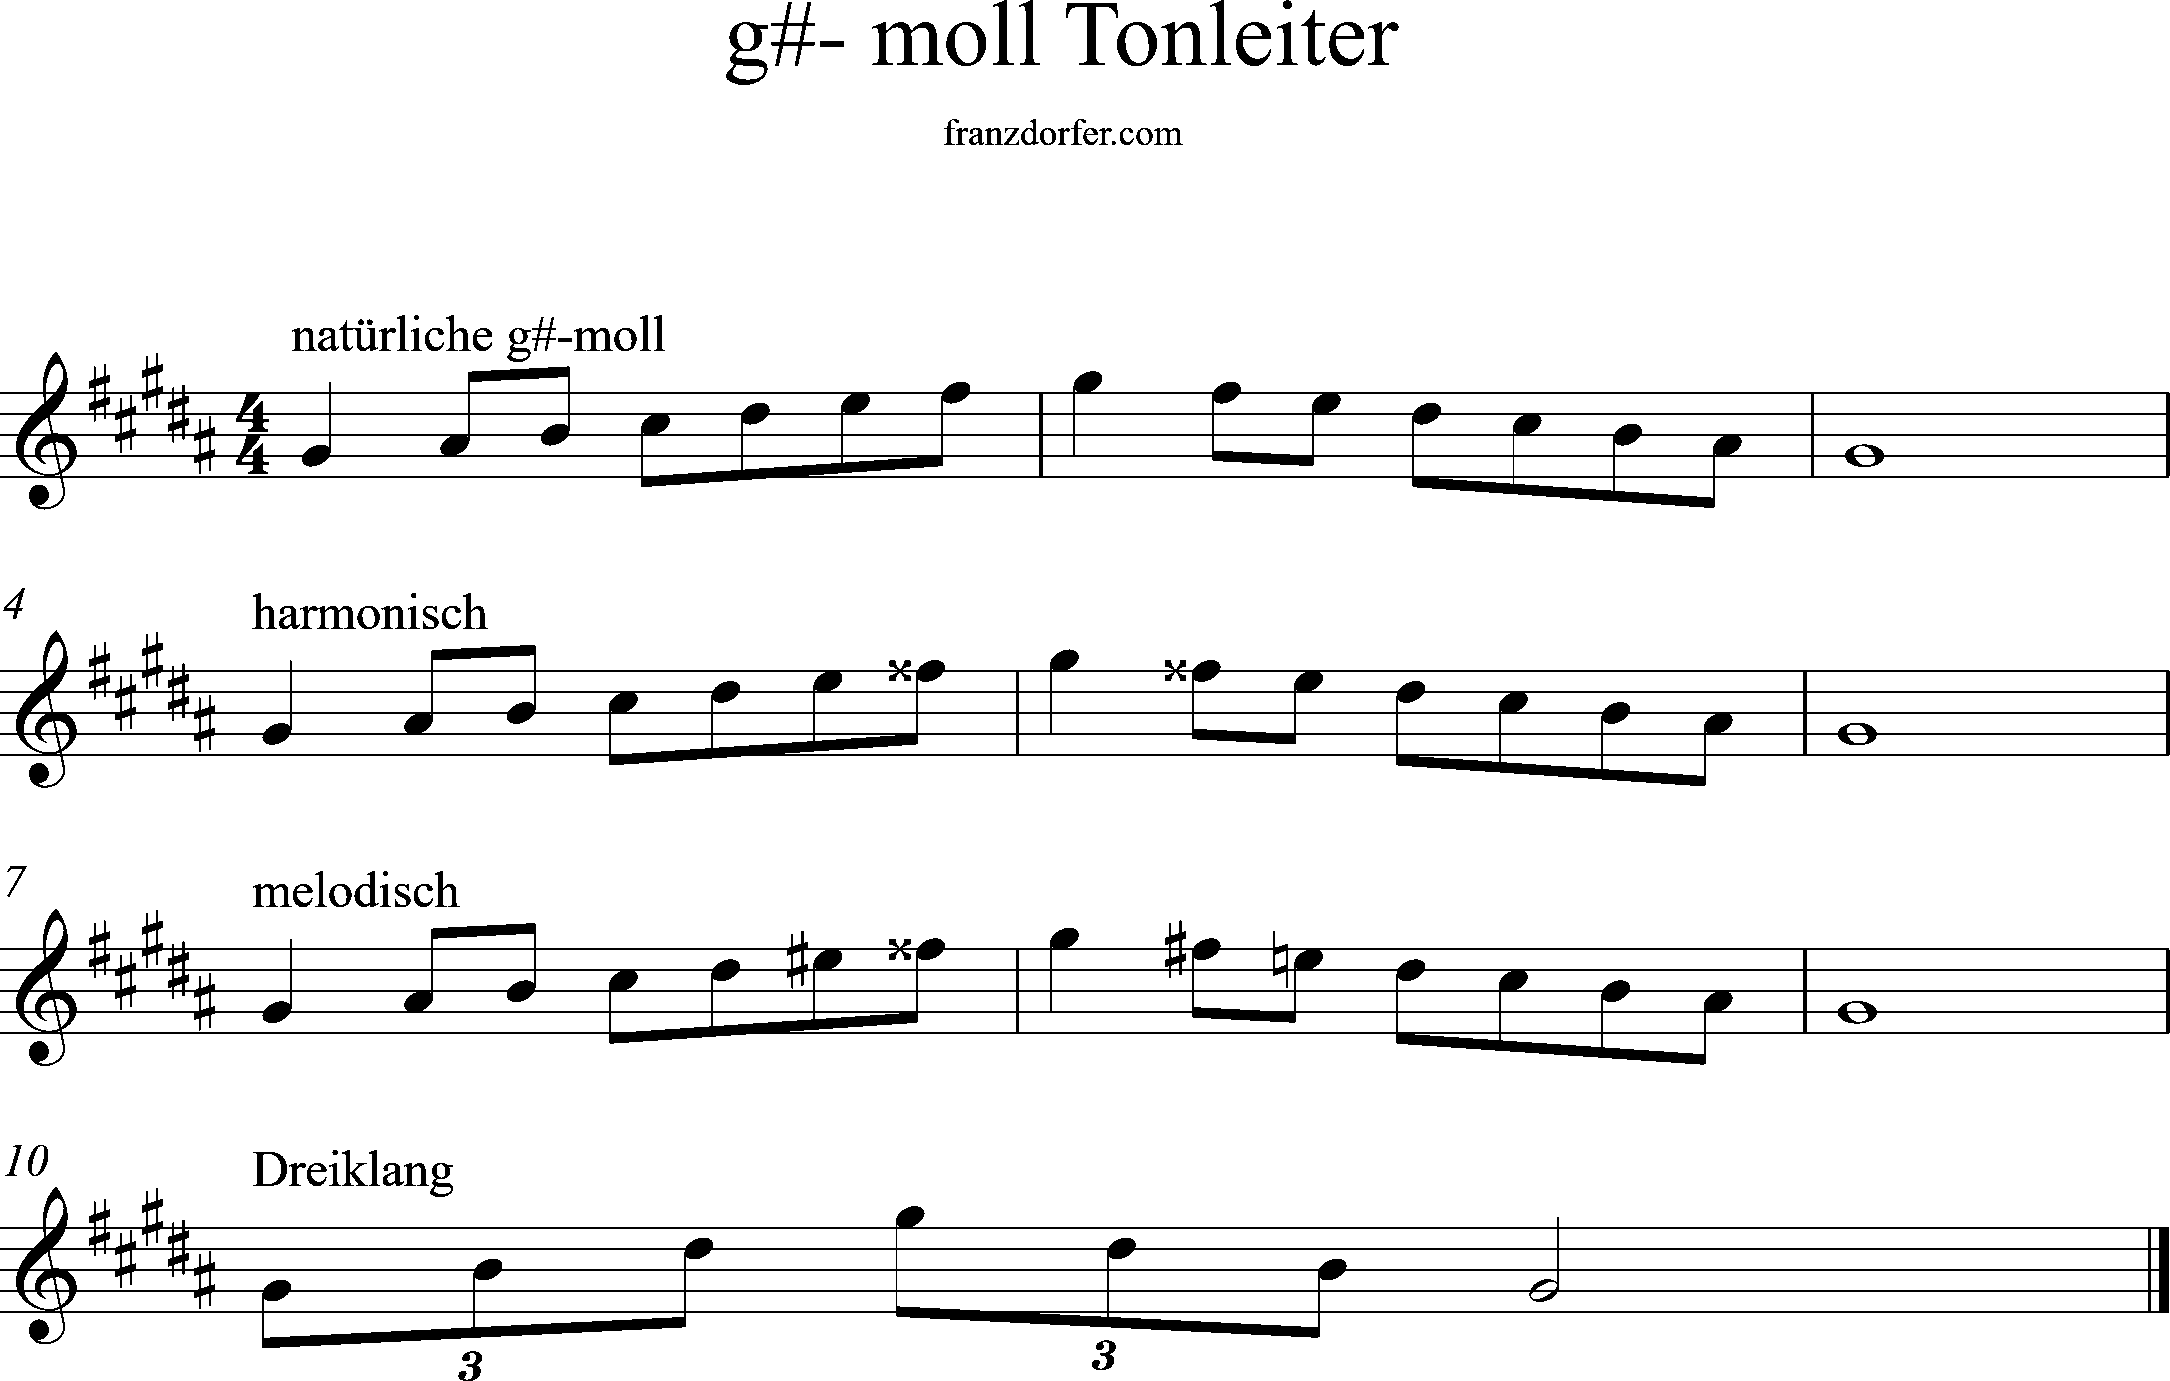 g#-minor, scale, middle octave